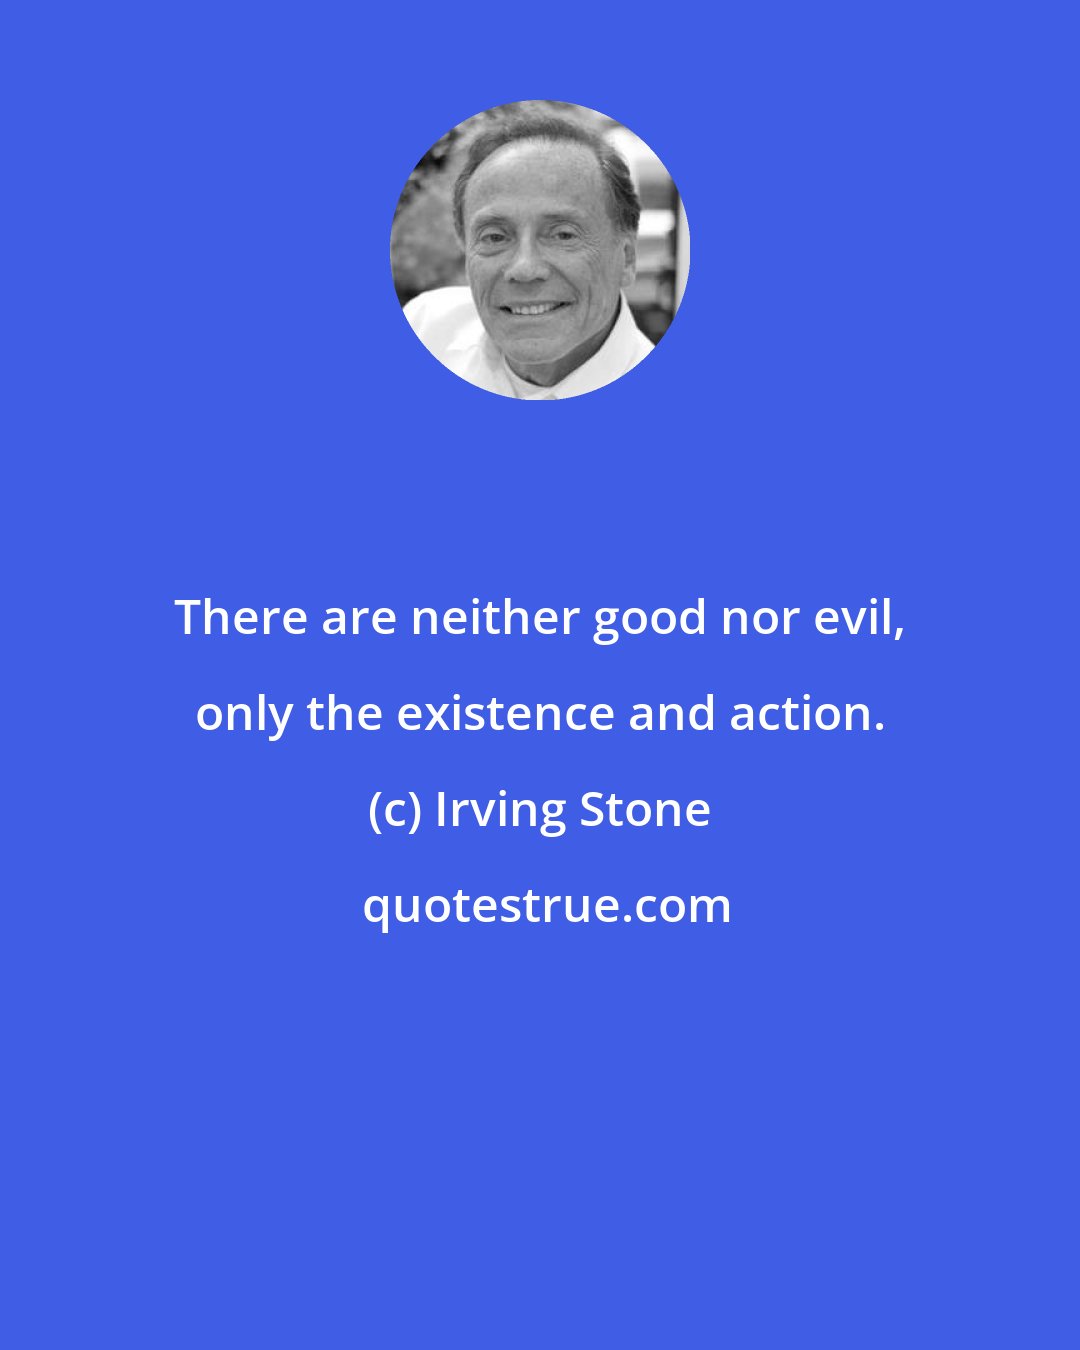 Irving Stone: There are neither good nor evil, only the existence and action.